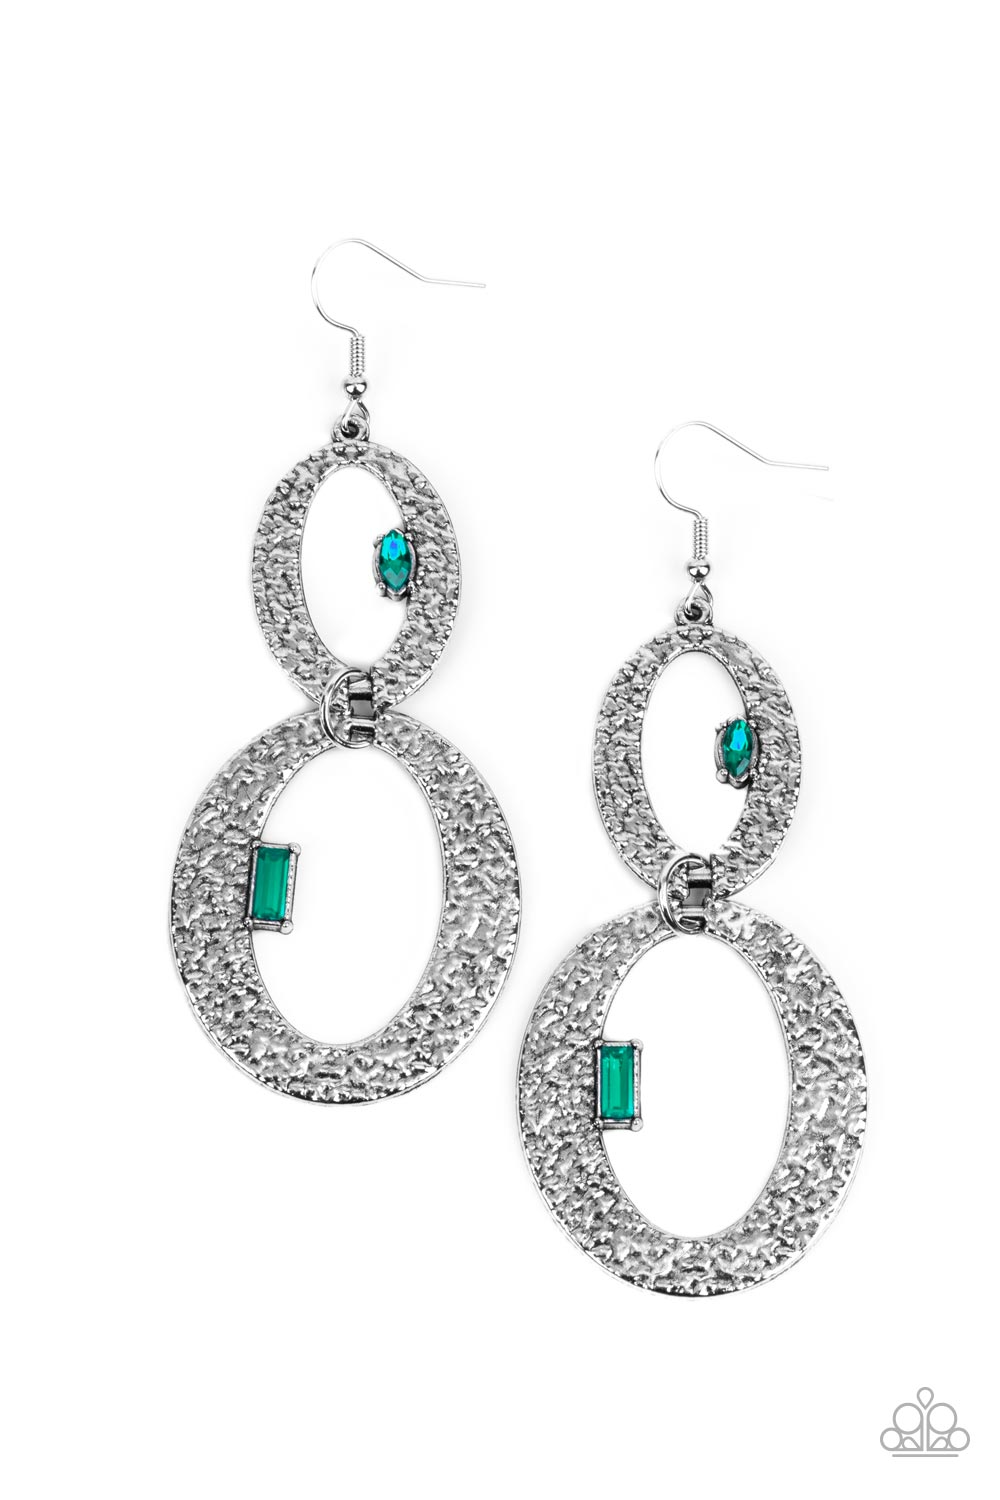 Earrings - OVAL and OVAL Again - Green